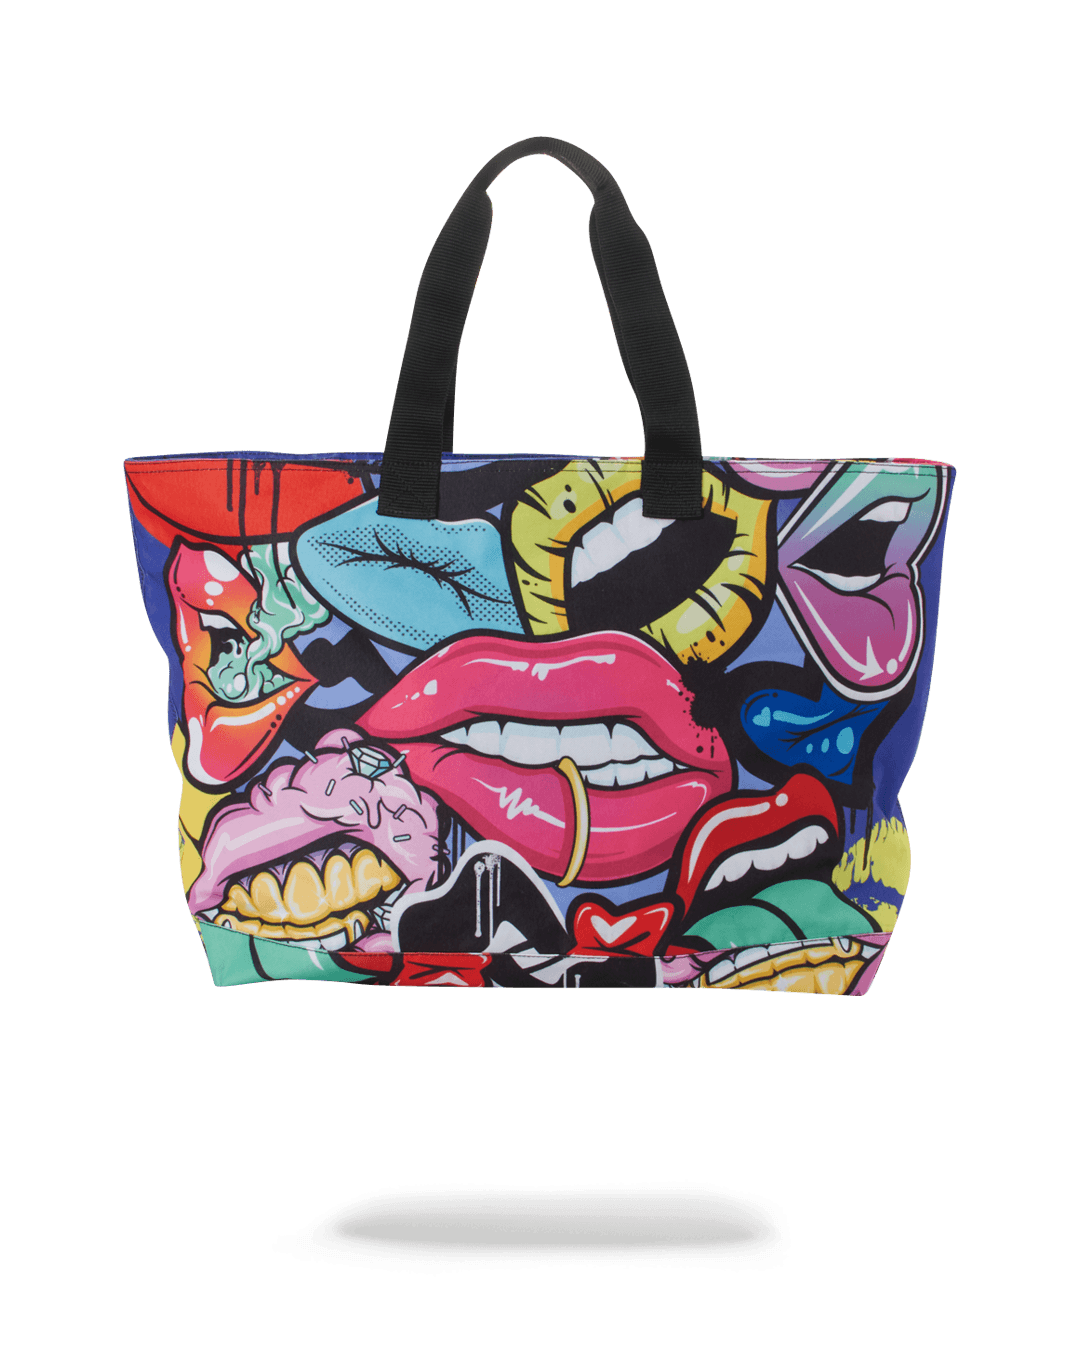 LIP SERVICE BEACH TOTE - HIGH QUALITY AND INEXPENSIVE - LIP SERVICE BEACH TOTE HIGH QUALITY AND INEXPENSIVE-01-2